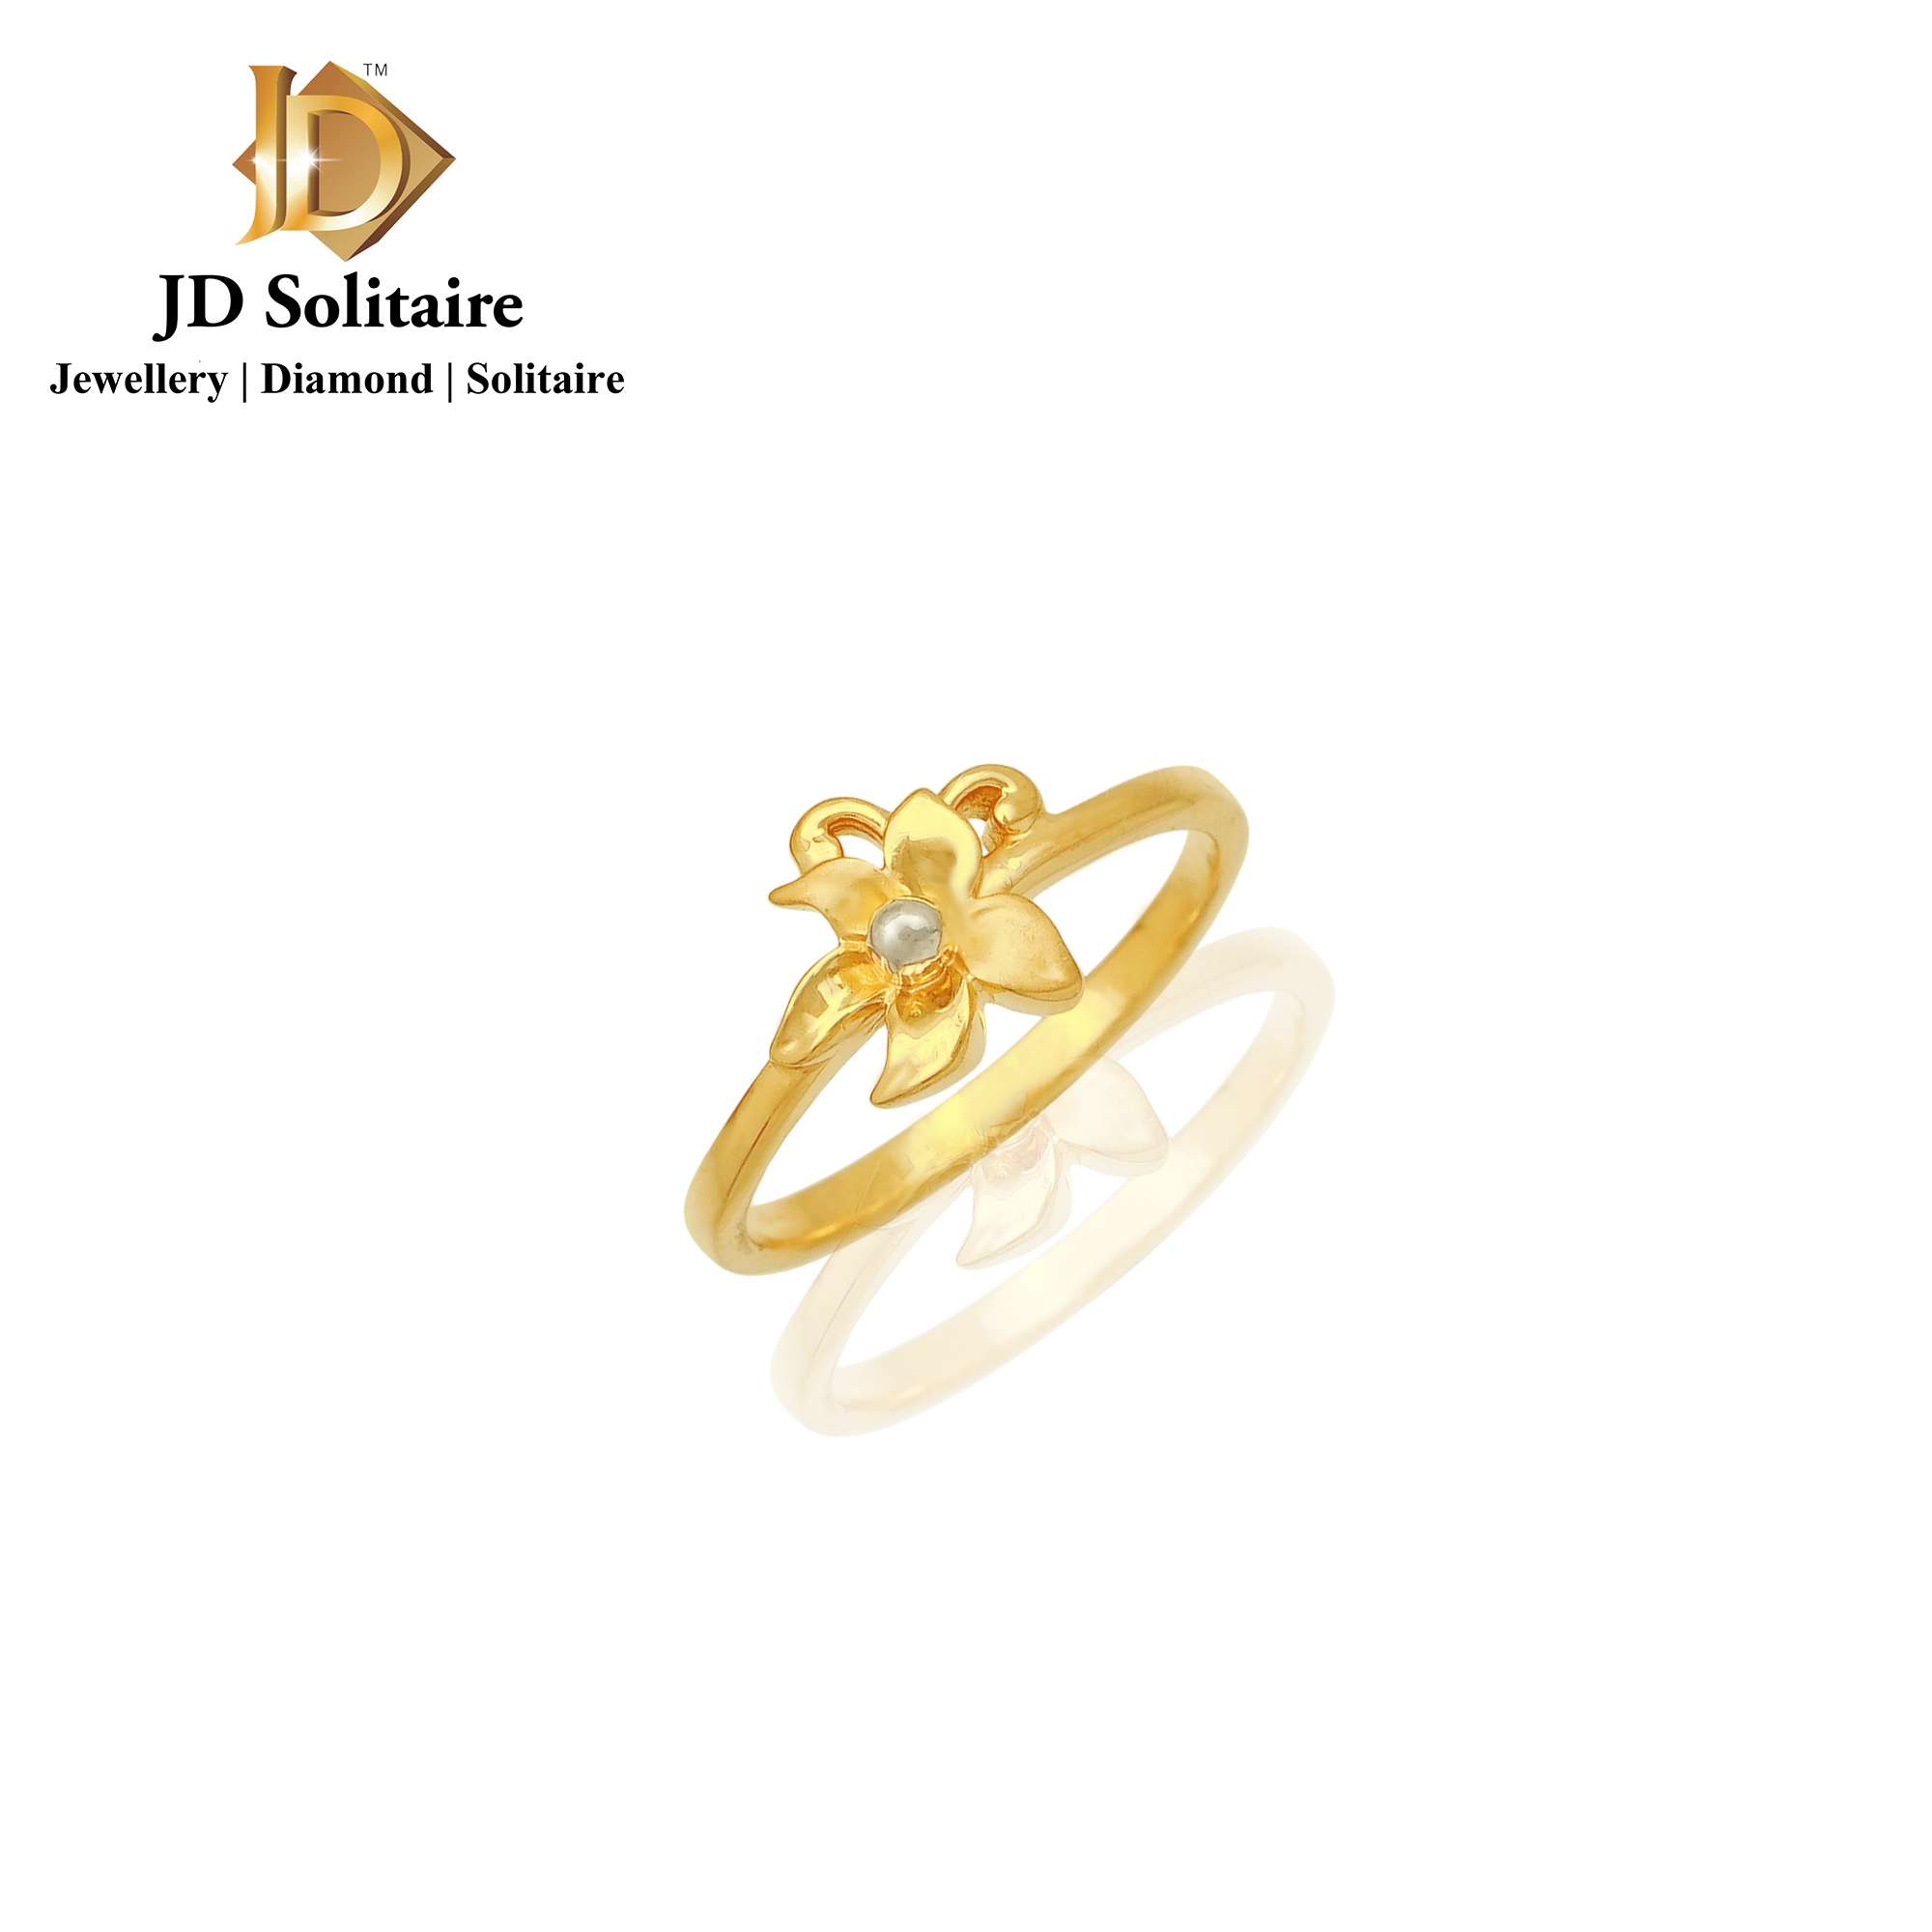 Ladies Fancy Gold Engagement Ring, 7.5gm, Size: 16 Mm at Rs 500 in Surat